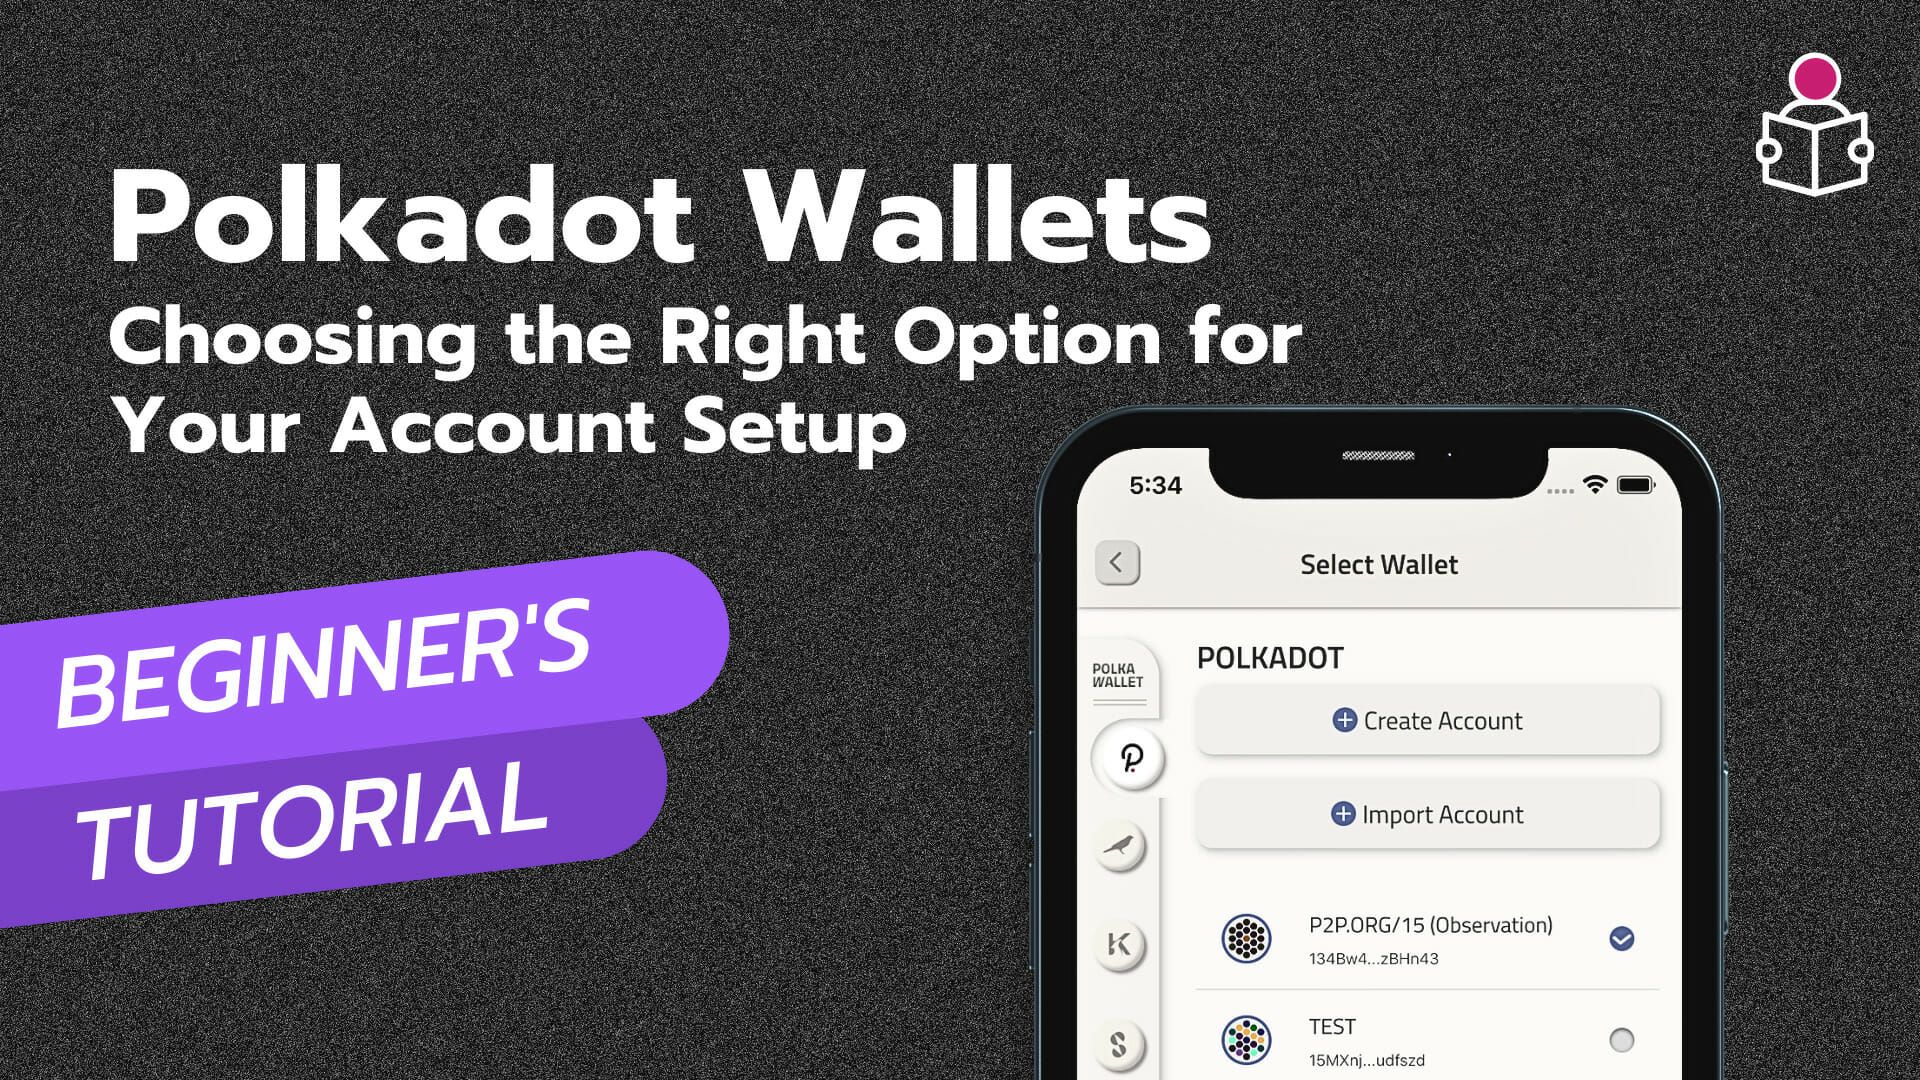 Polkadot Wallets Choosing the Right Option for Your Account Setup - Describedot